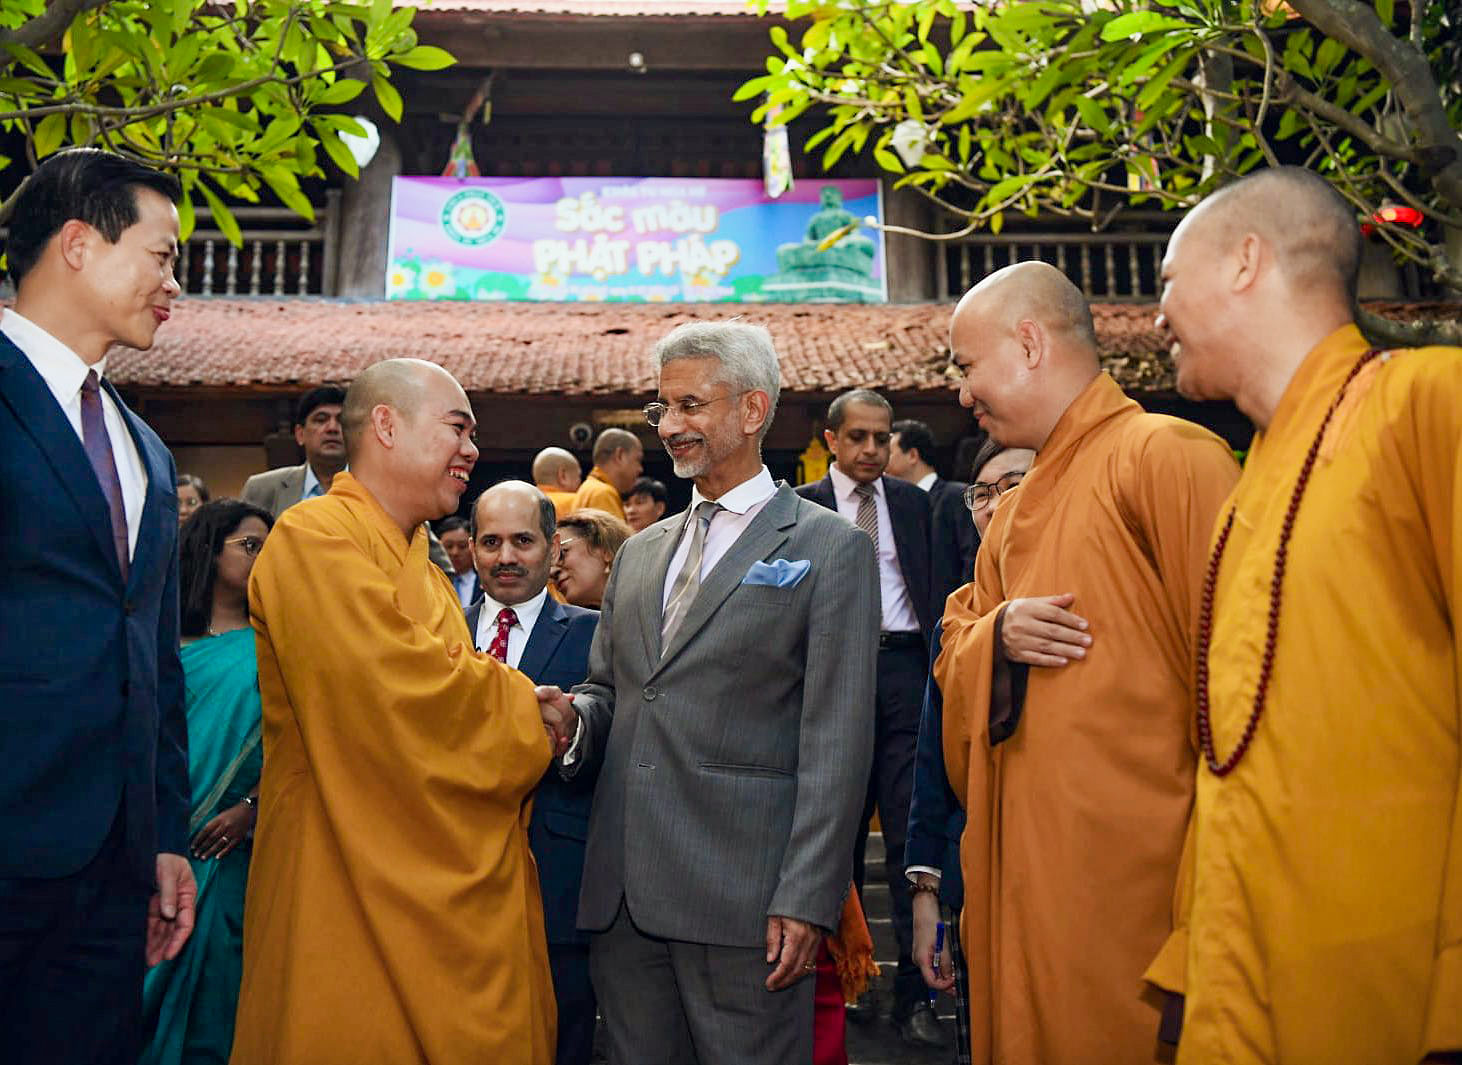 External Affairs Minister S Jaishankar meets with Buddhist monks during his visit to Phat Tich pagoda to offer prayers in Bac Ninh, Vitenam | ANI